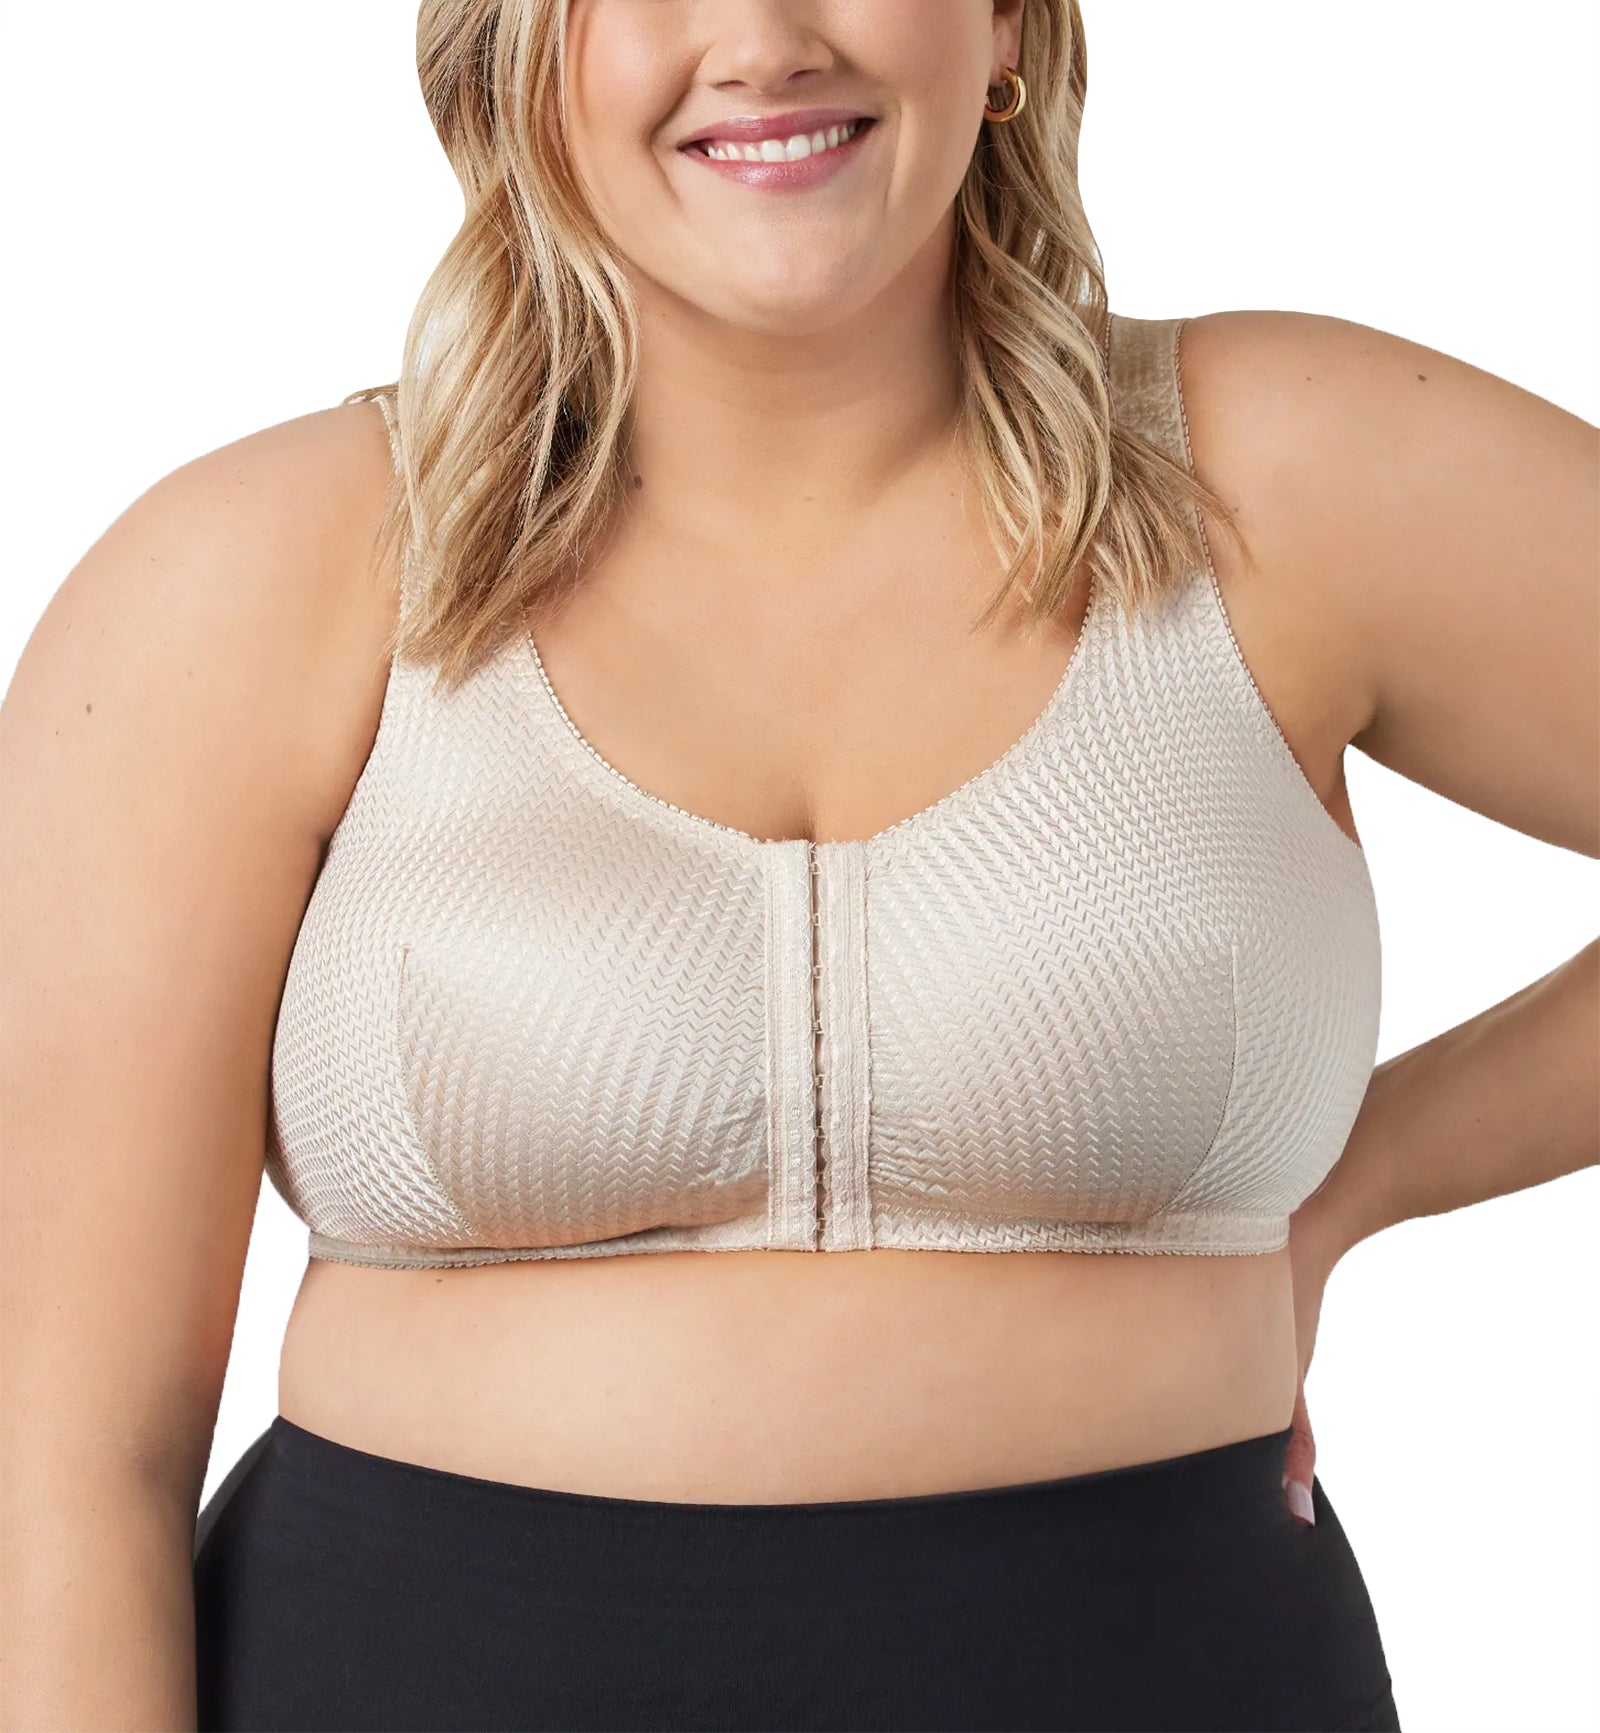 Plus Size Bras for Women, Comfort Wireless Bras with Support and Lift,  Front Closure Bras for Women Plus Size, Beige, XX-Large